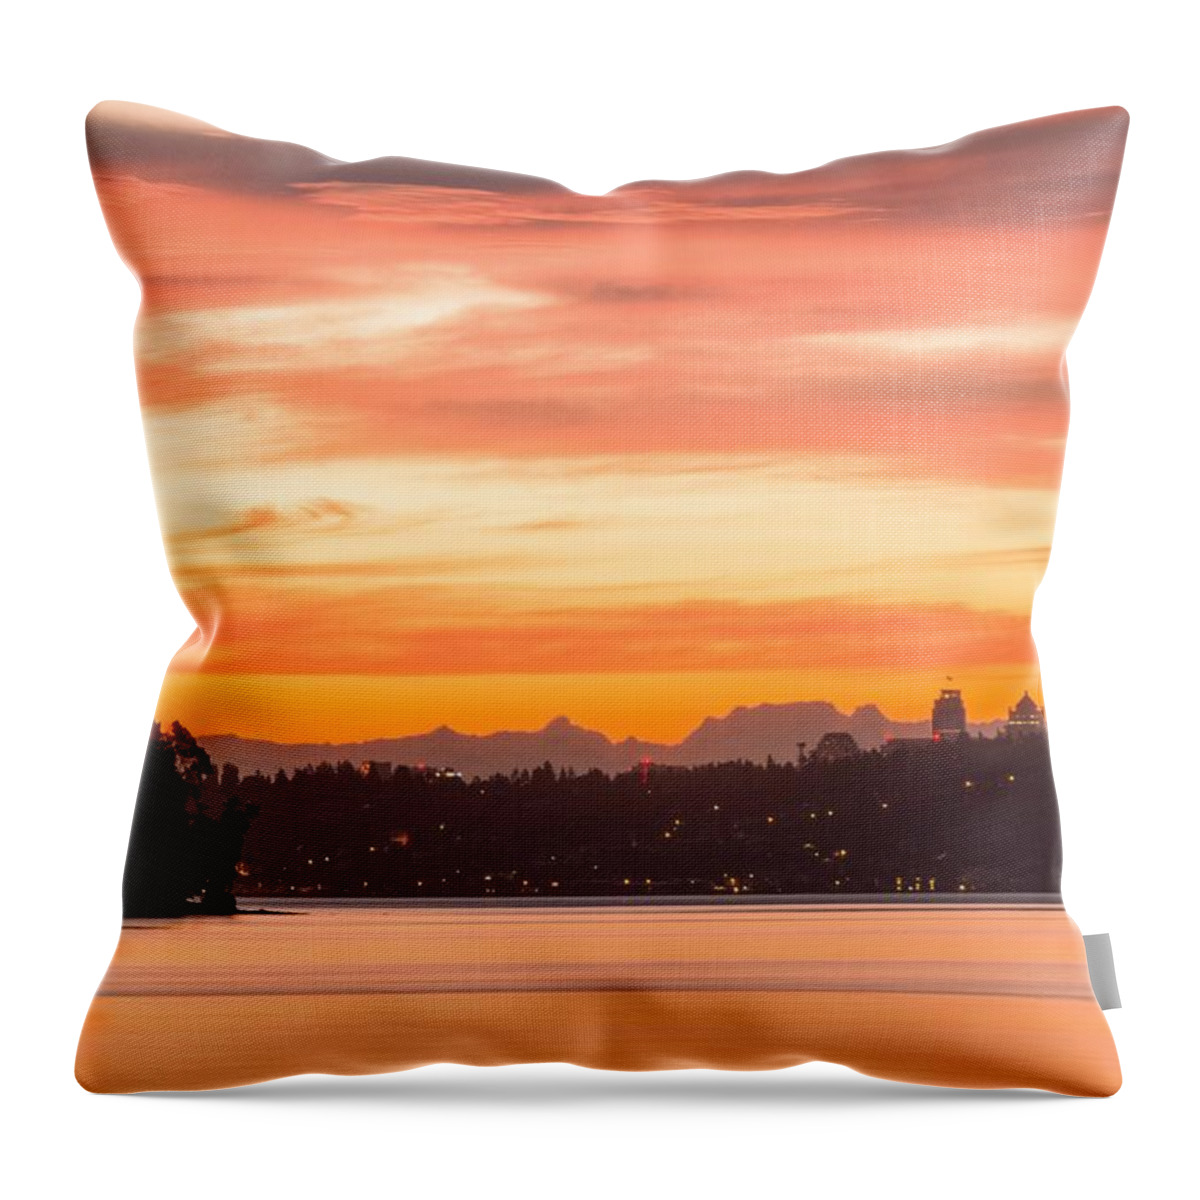 Sunrise; Orange Sky; Sun Reflected In Clouds; West Seattle; Blake Island; Yukon Harbor; Puget Sound; Cascade Mountains; Silhouettes; Shimmering Waters; Calm Waters; A Glaze Of Orange; E Faithe Lester; Faithe Lester; Faith Lester Throw Pillow featuring the photograph A Glaze of Orange by E Faithe Lester